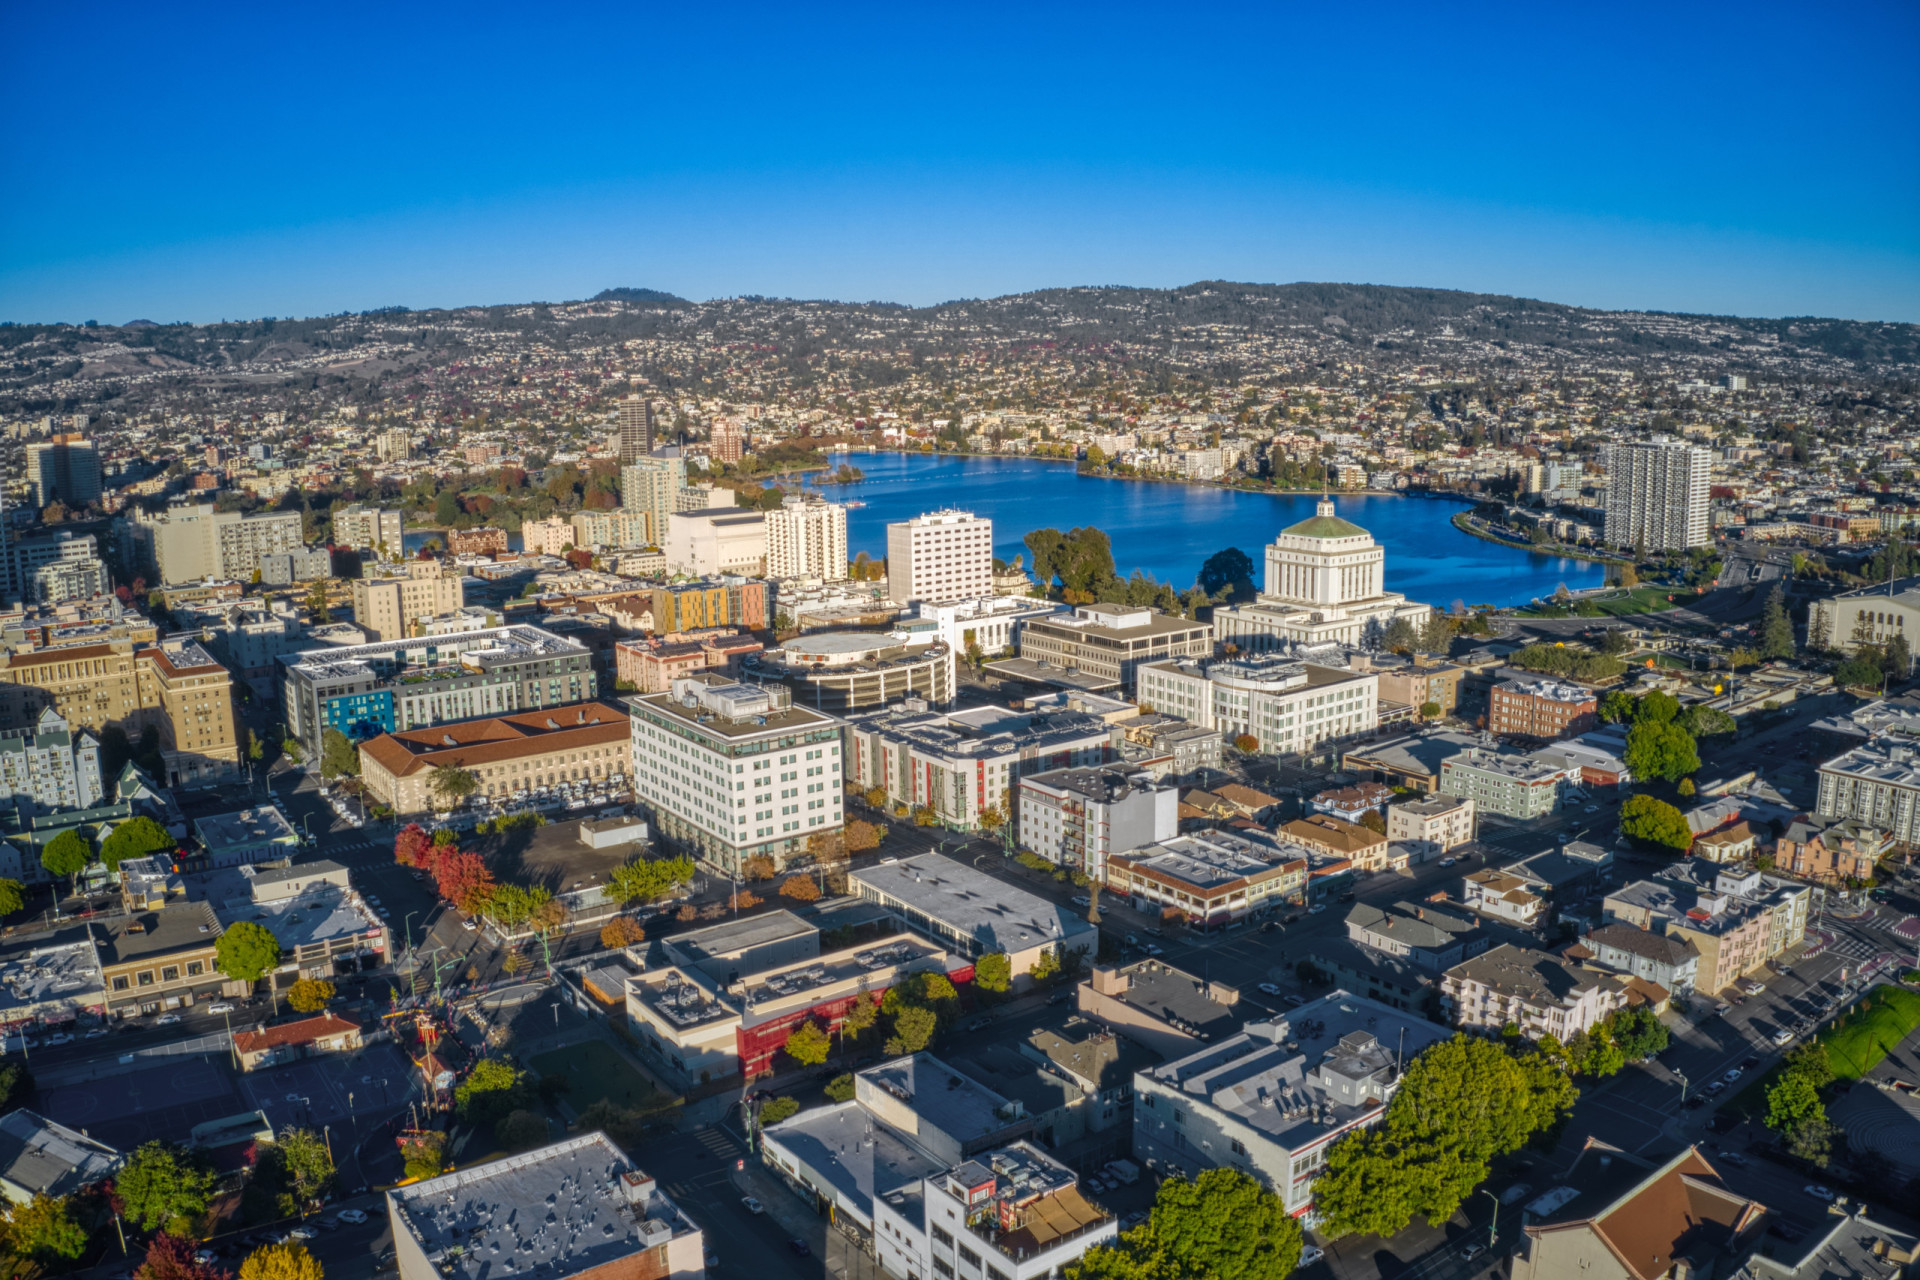 <p>Oakland stands out with a rent index of 74.3. Known for one of America's busiest ports, this Californian city is a vital trade and transport center with escalating rental prices.</p><p><a href="https://www.msn.com/en-in/community/channel/vid-7xx8mnucu55yw63we9va2gwr7uihbxwc68fxqp25x6tg4ftibpra?cvid=94631541bc0f4f89bfd59158d696ad7e">Follow us and access great exclusive content every day</a></p>